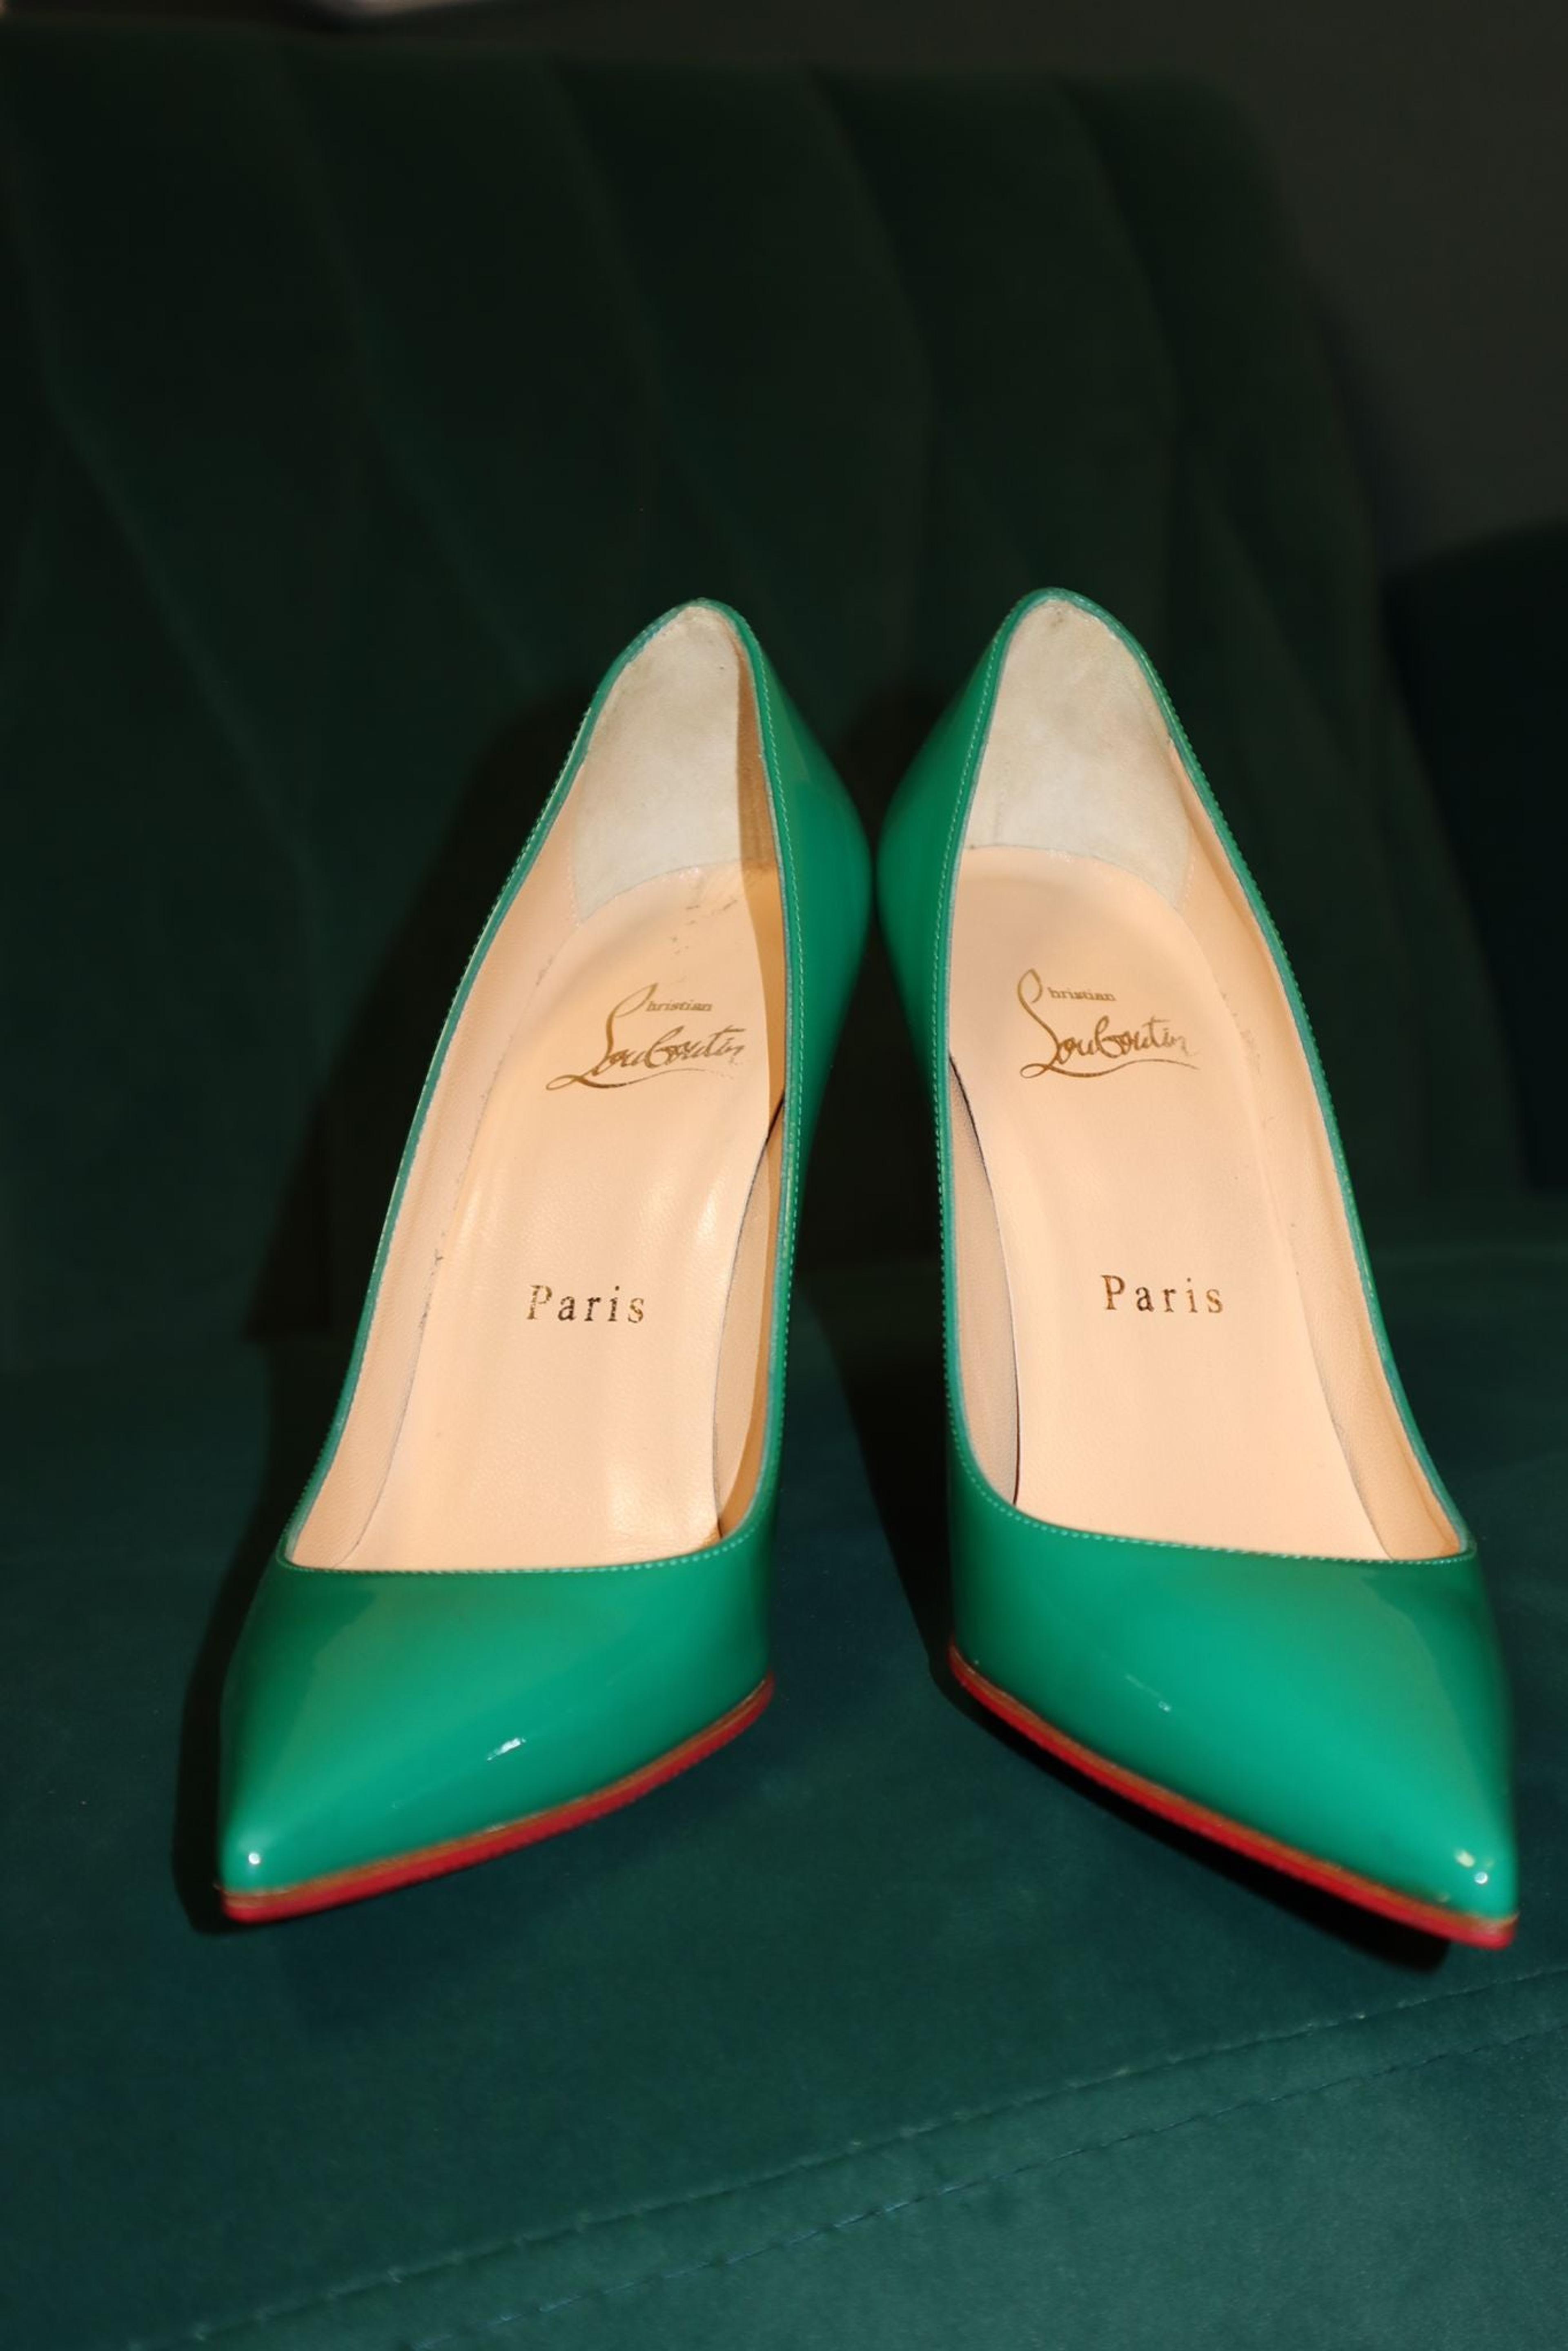 Alternate View 7 of Christian Louboutin Green Patent Leather Kate Pumps 35.5